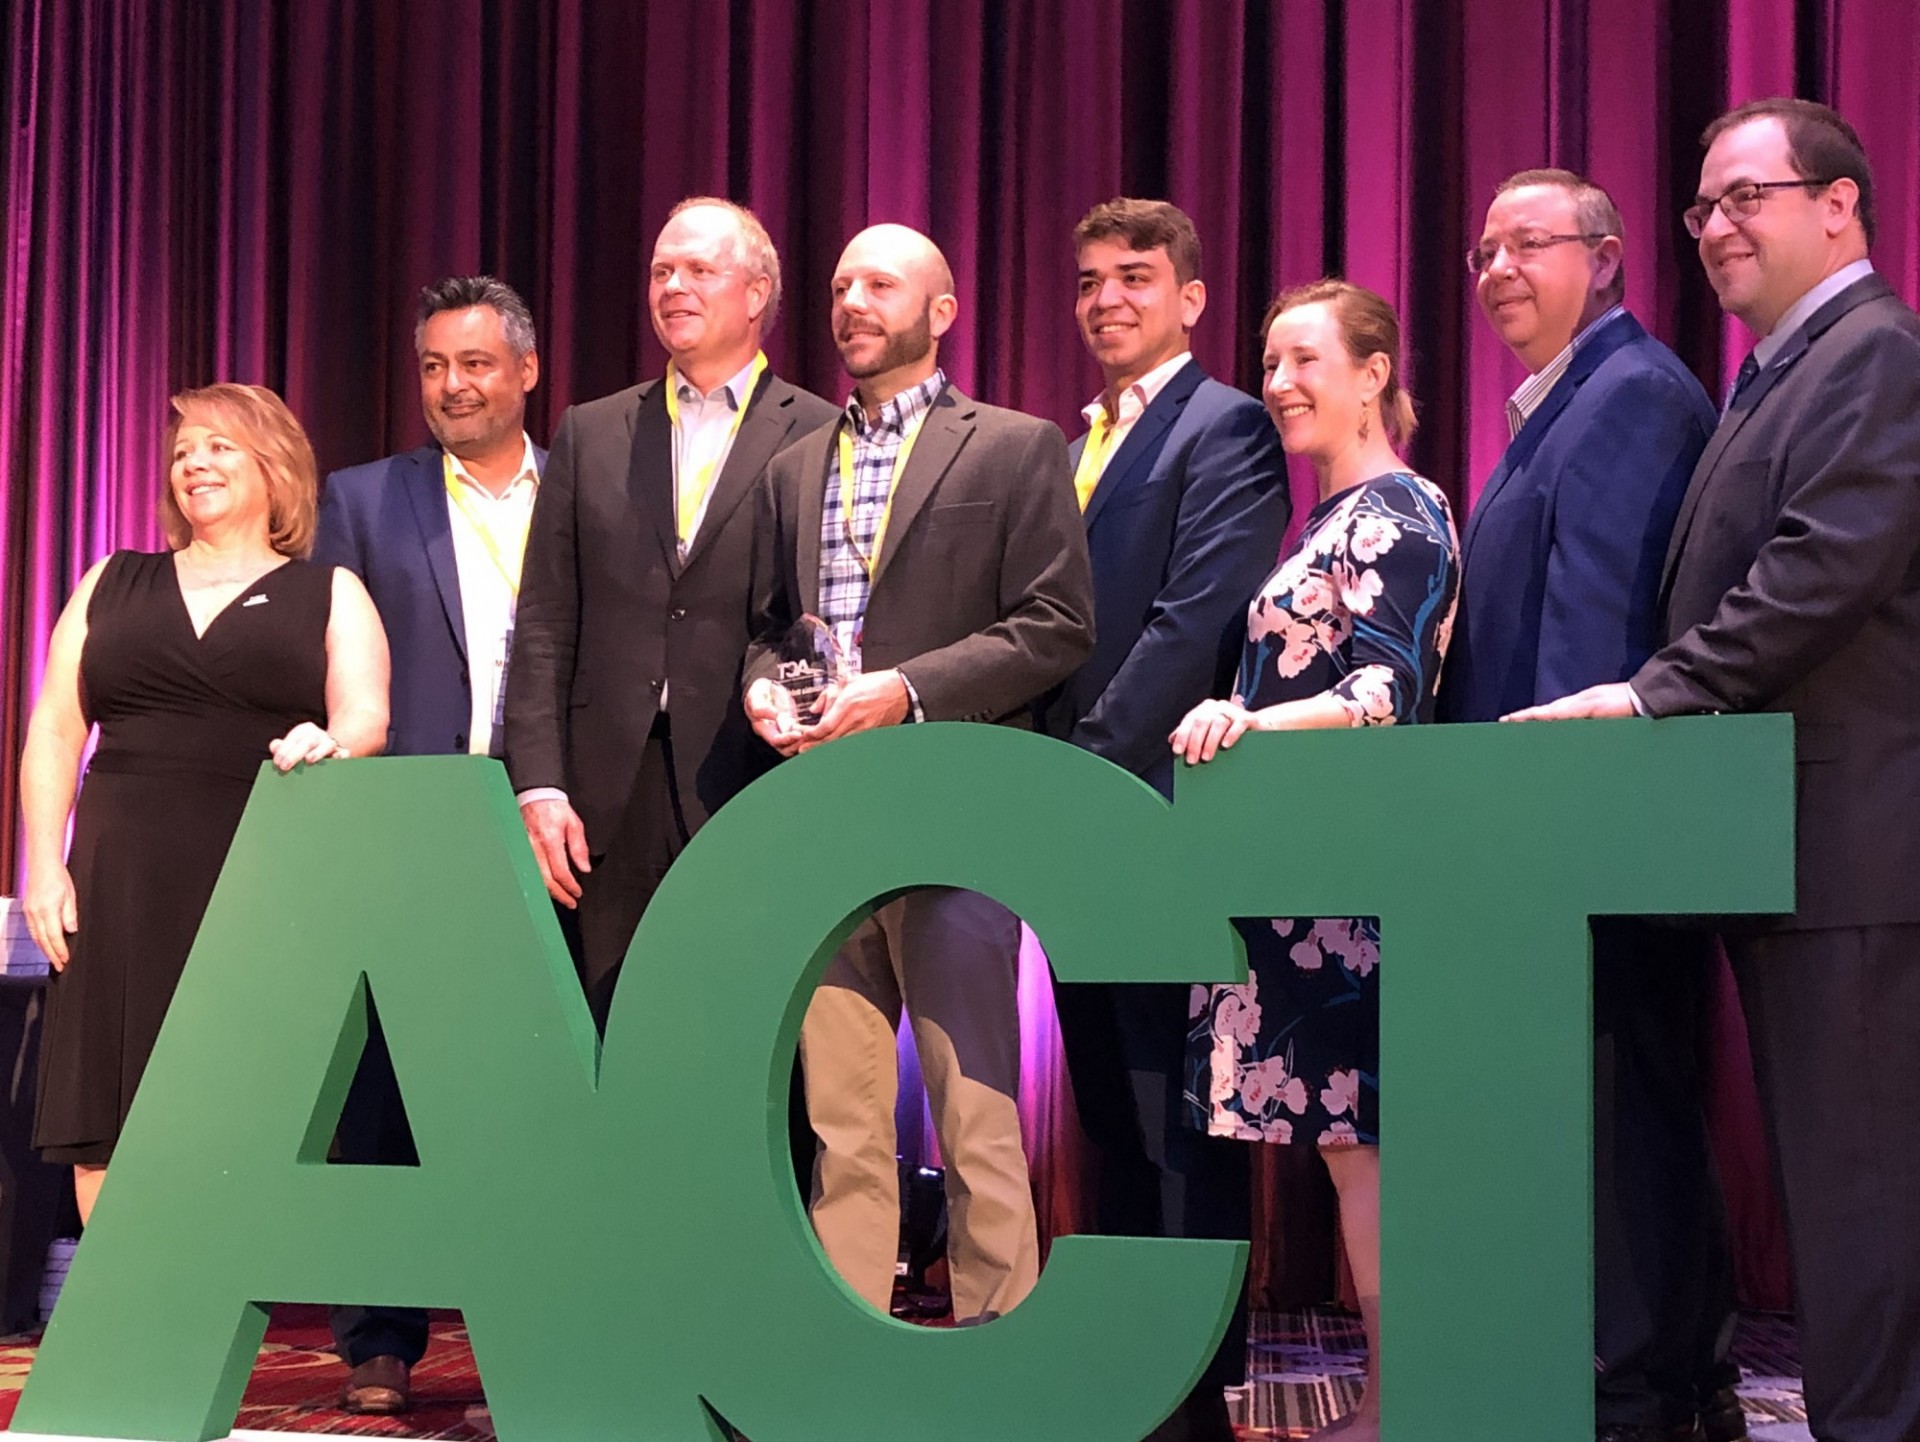 Columbia University representatives from the Transportation and Environmental Stewardship offices accept the award from ACT at the International Conference on August 7, 2019.